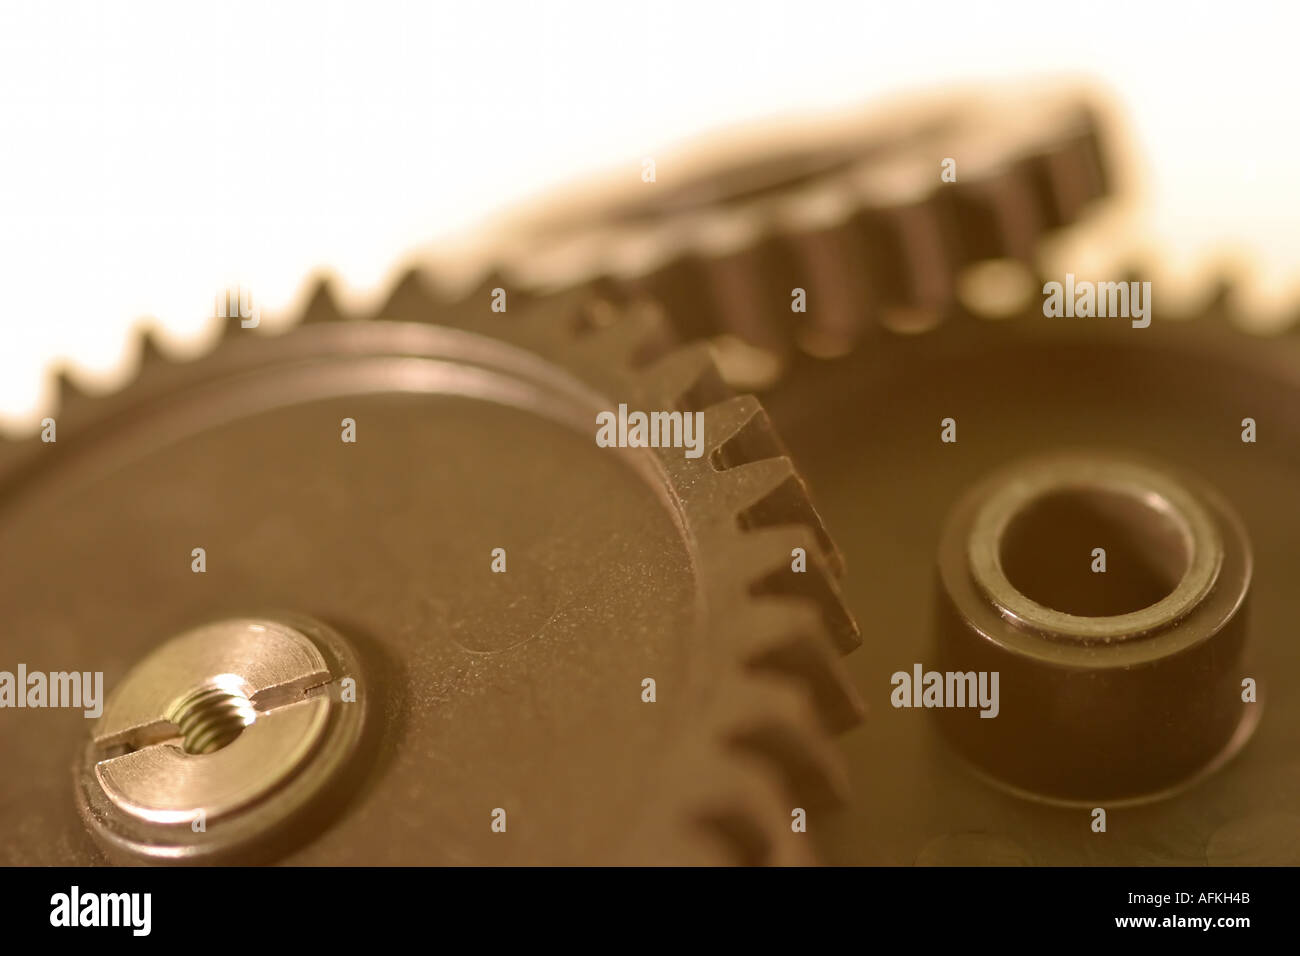 3 cogs piled up, symbolizing disarray, disorganization, machinery system or process out of order Stock Photo